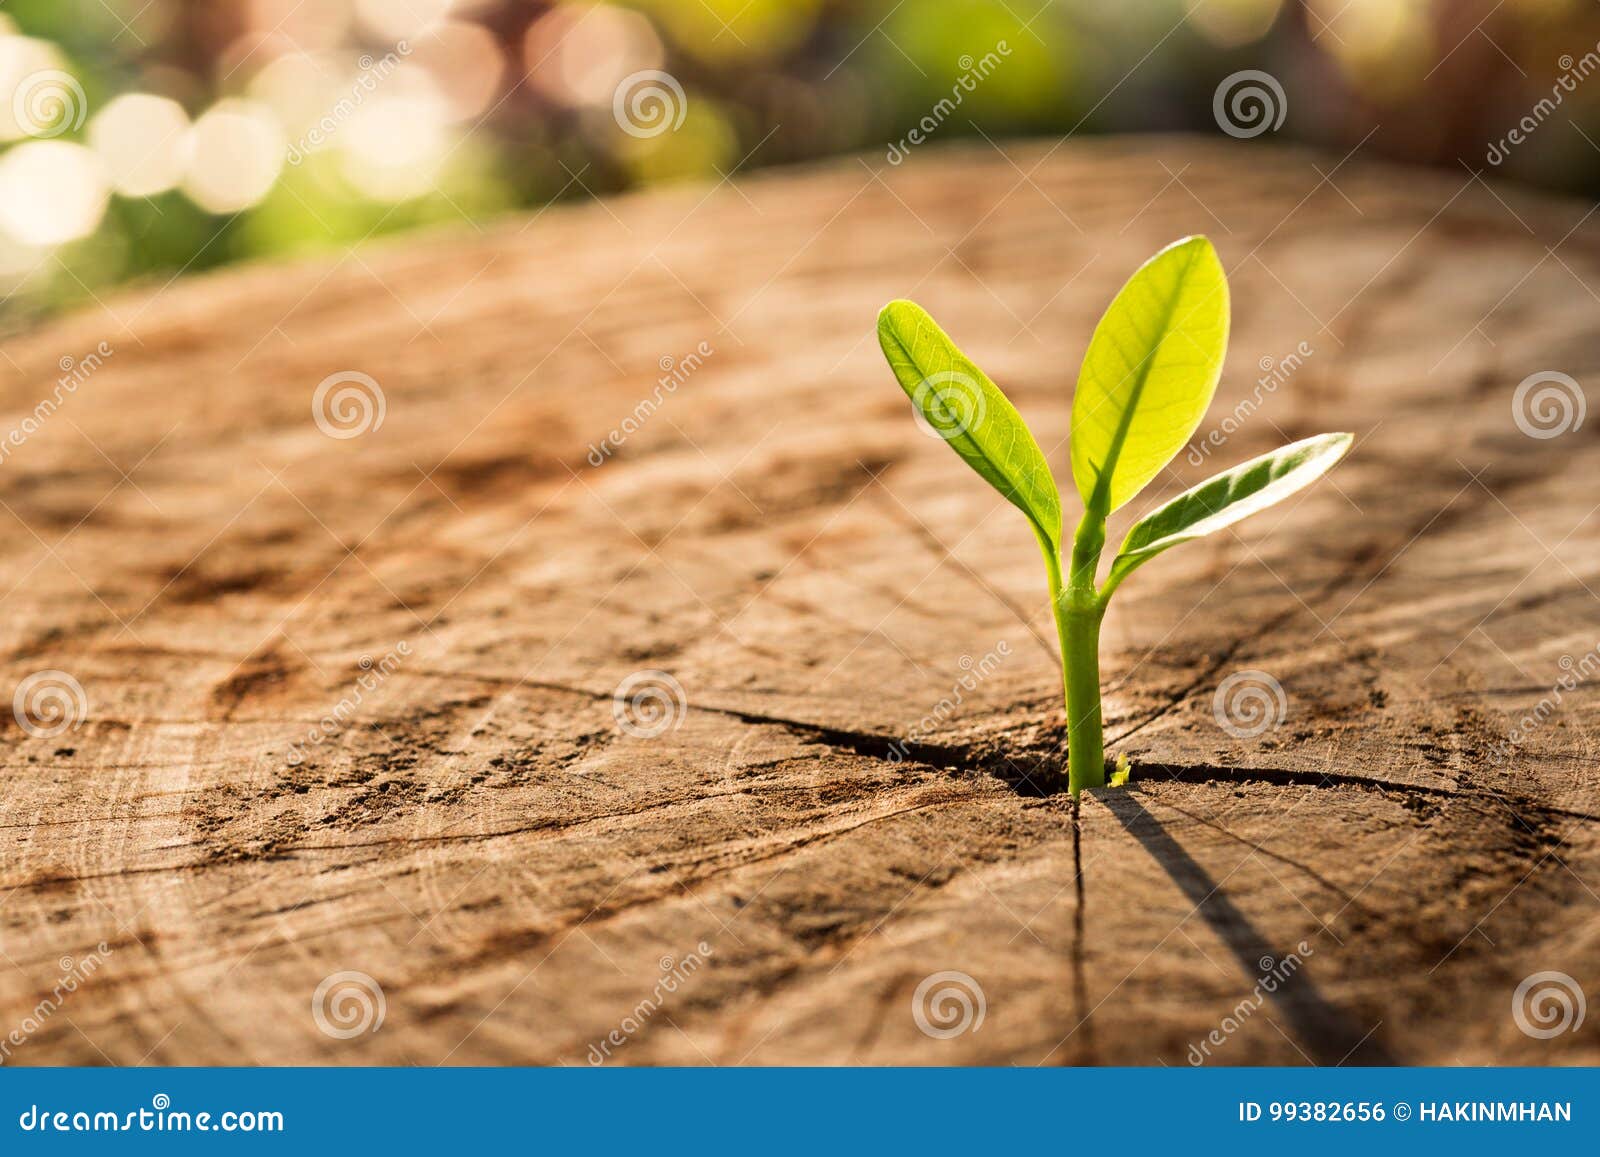 new life concept with seedling growing sprout tree.